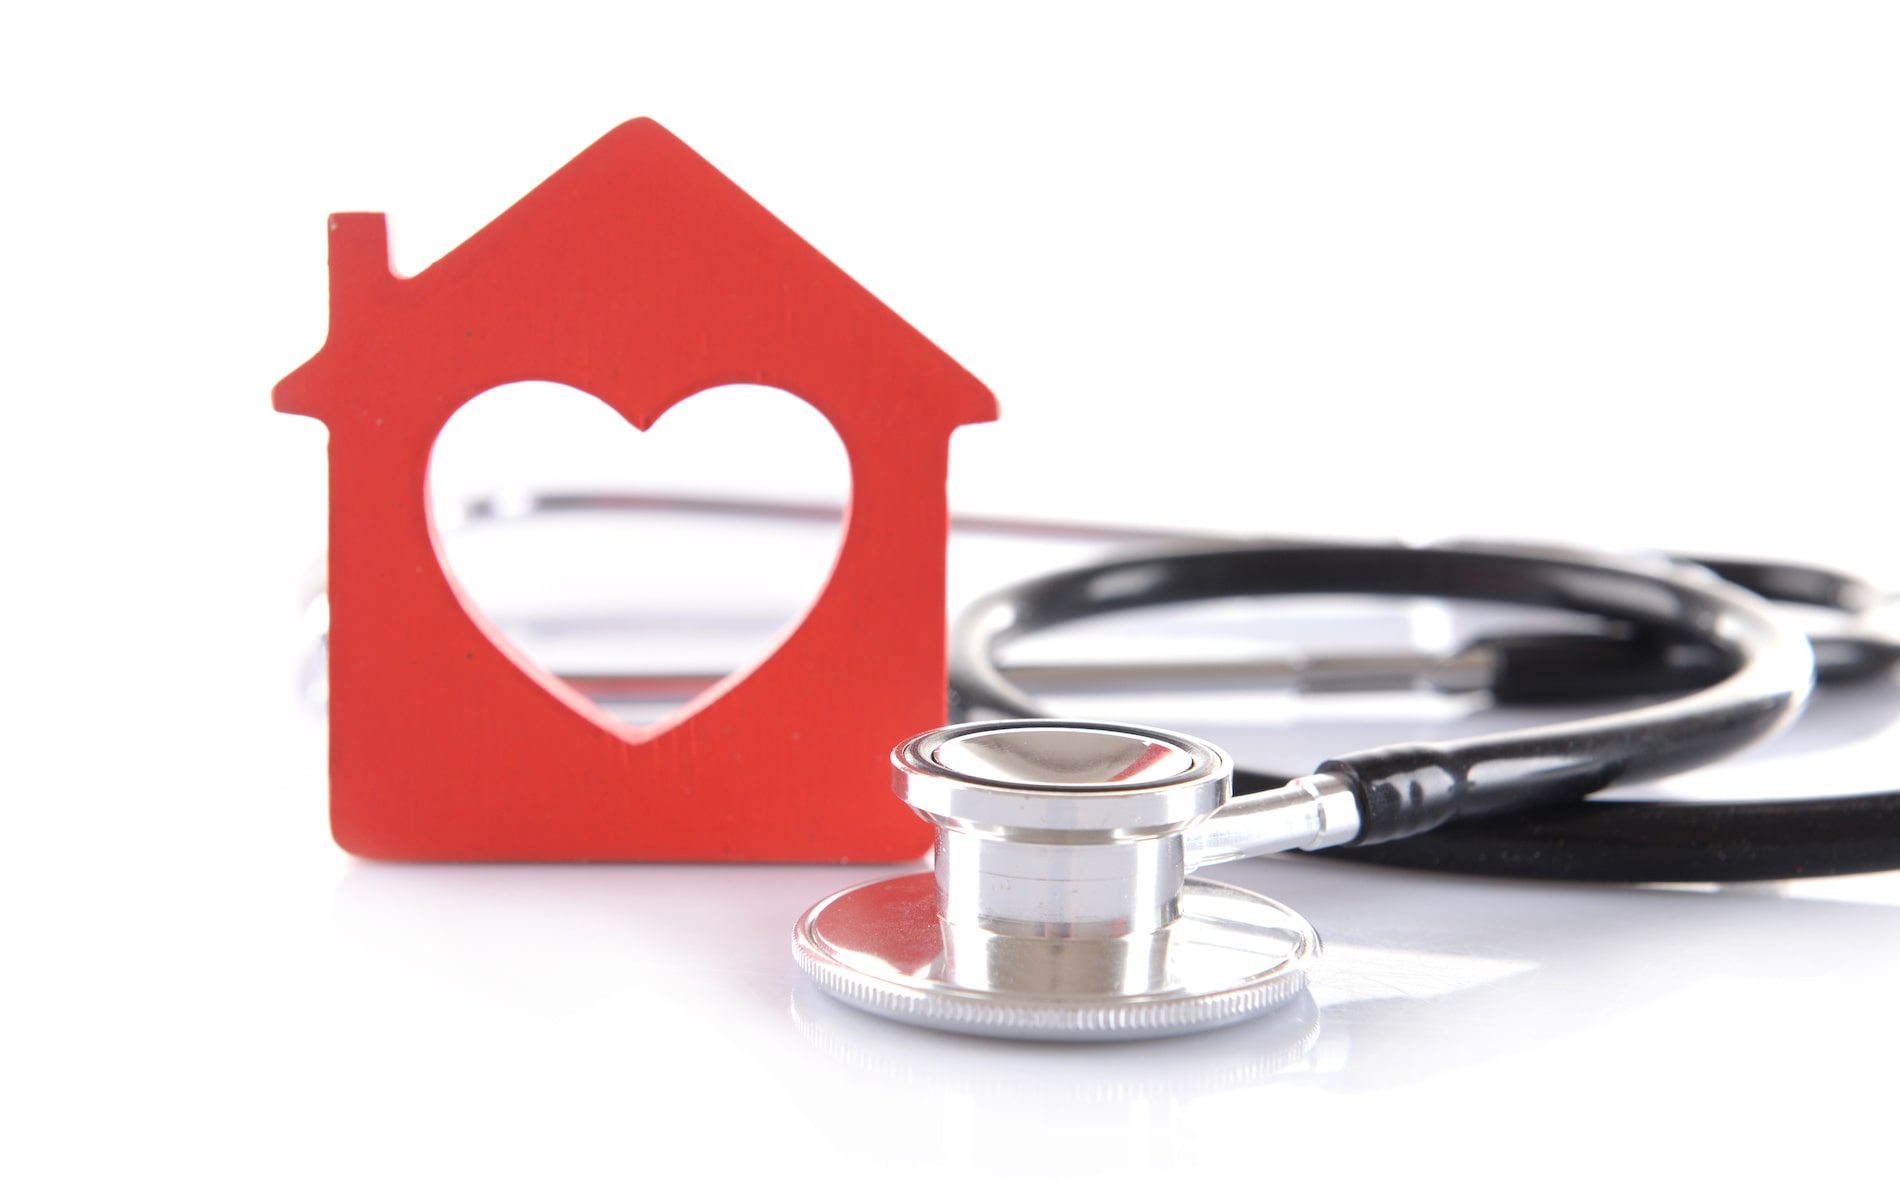 Red house and stethoscope 